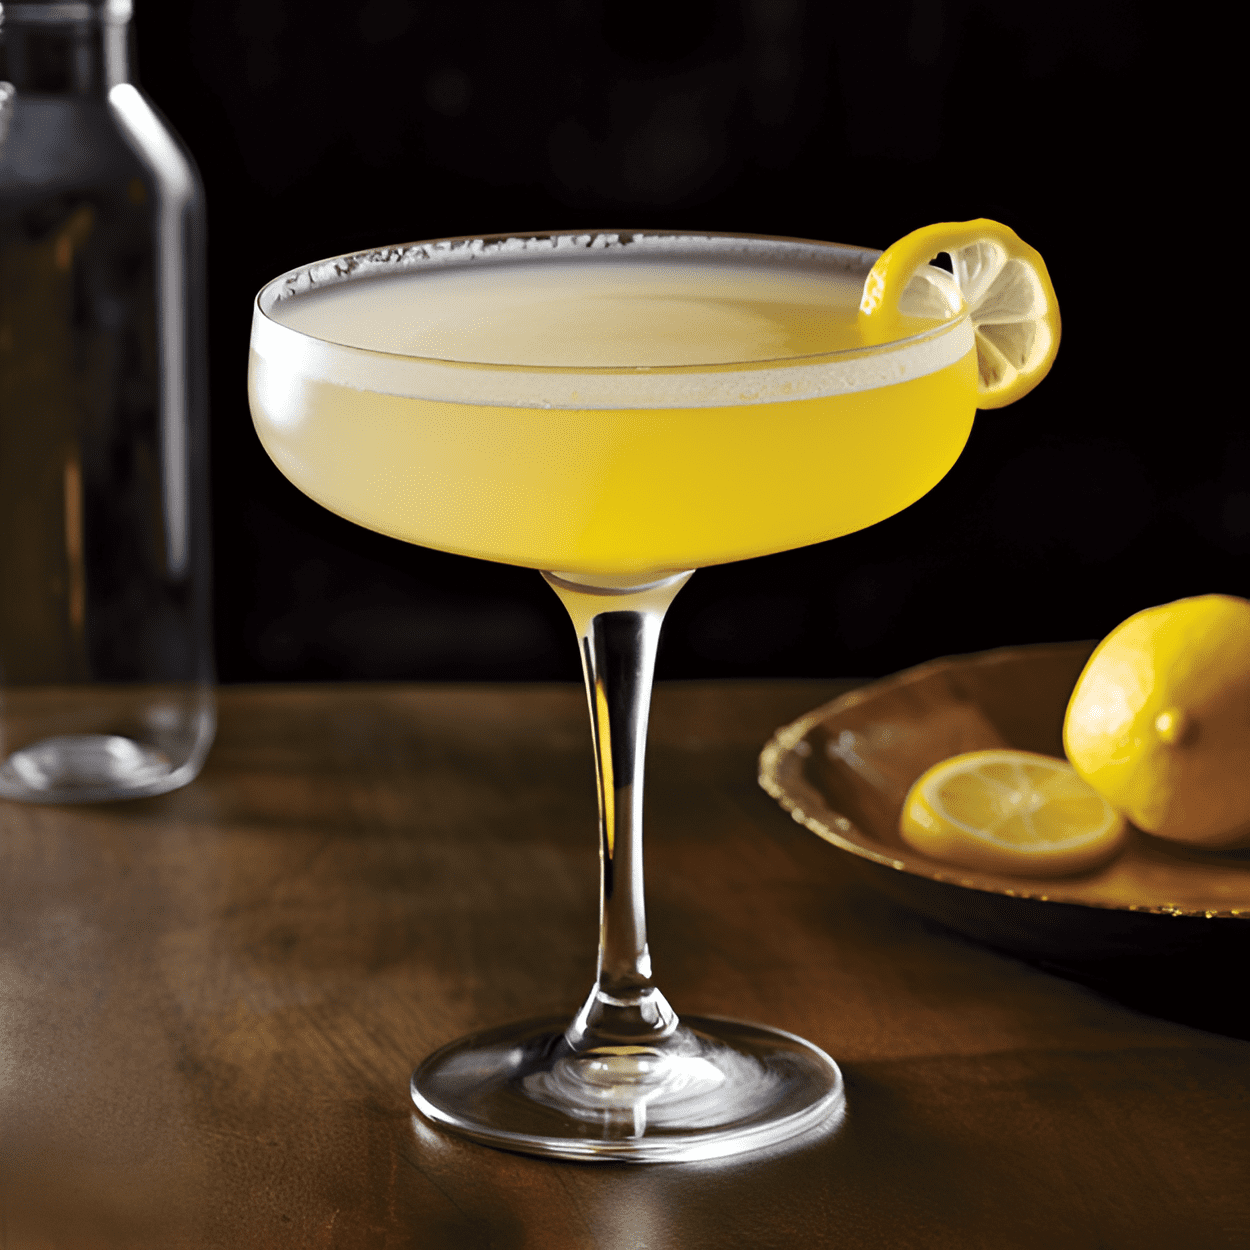 The 20th Century cocktail is a harmonious blend of sweet, sour, and bitter flavors. The gin provides a strong, yet smooth base, the Lillet Blanc adds a sweet and fruity touch, the lemon juice brings a refreshing sourness, and the crème de cacao gives it a unique chocolatey finish.